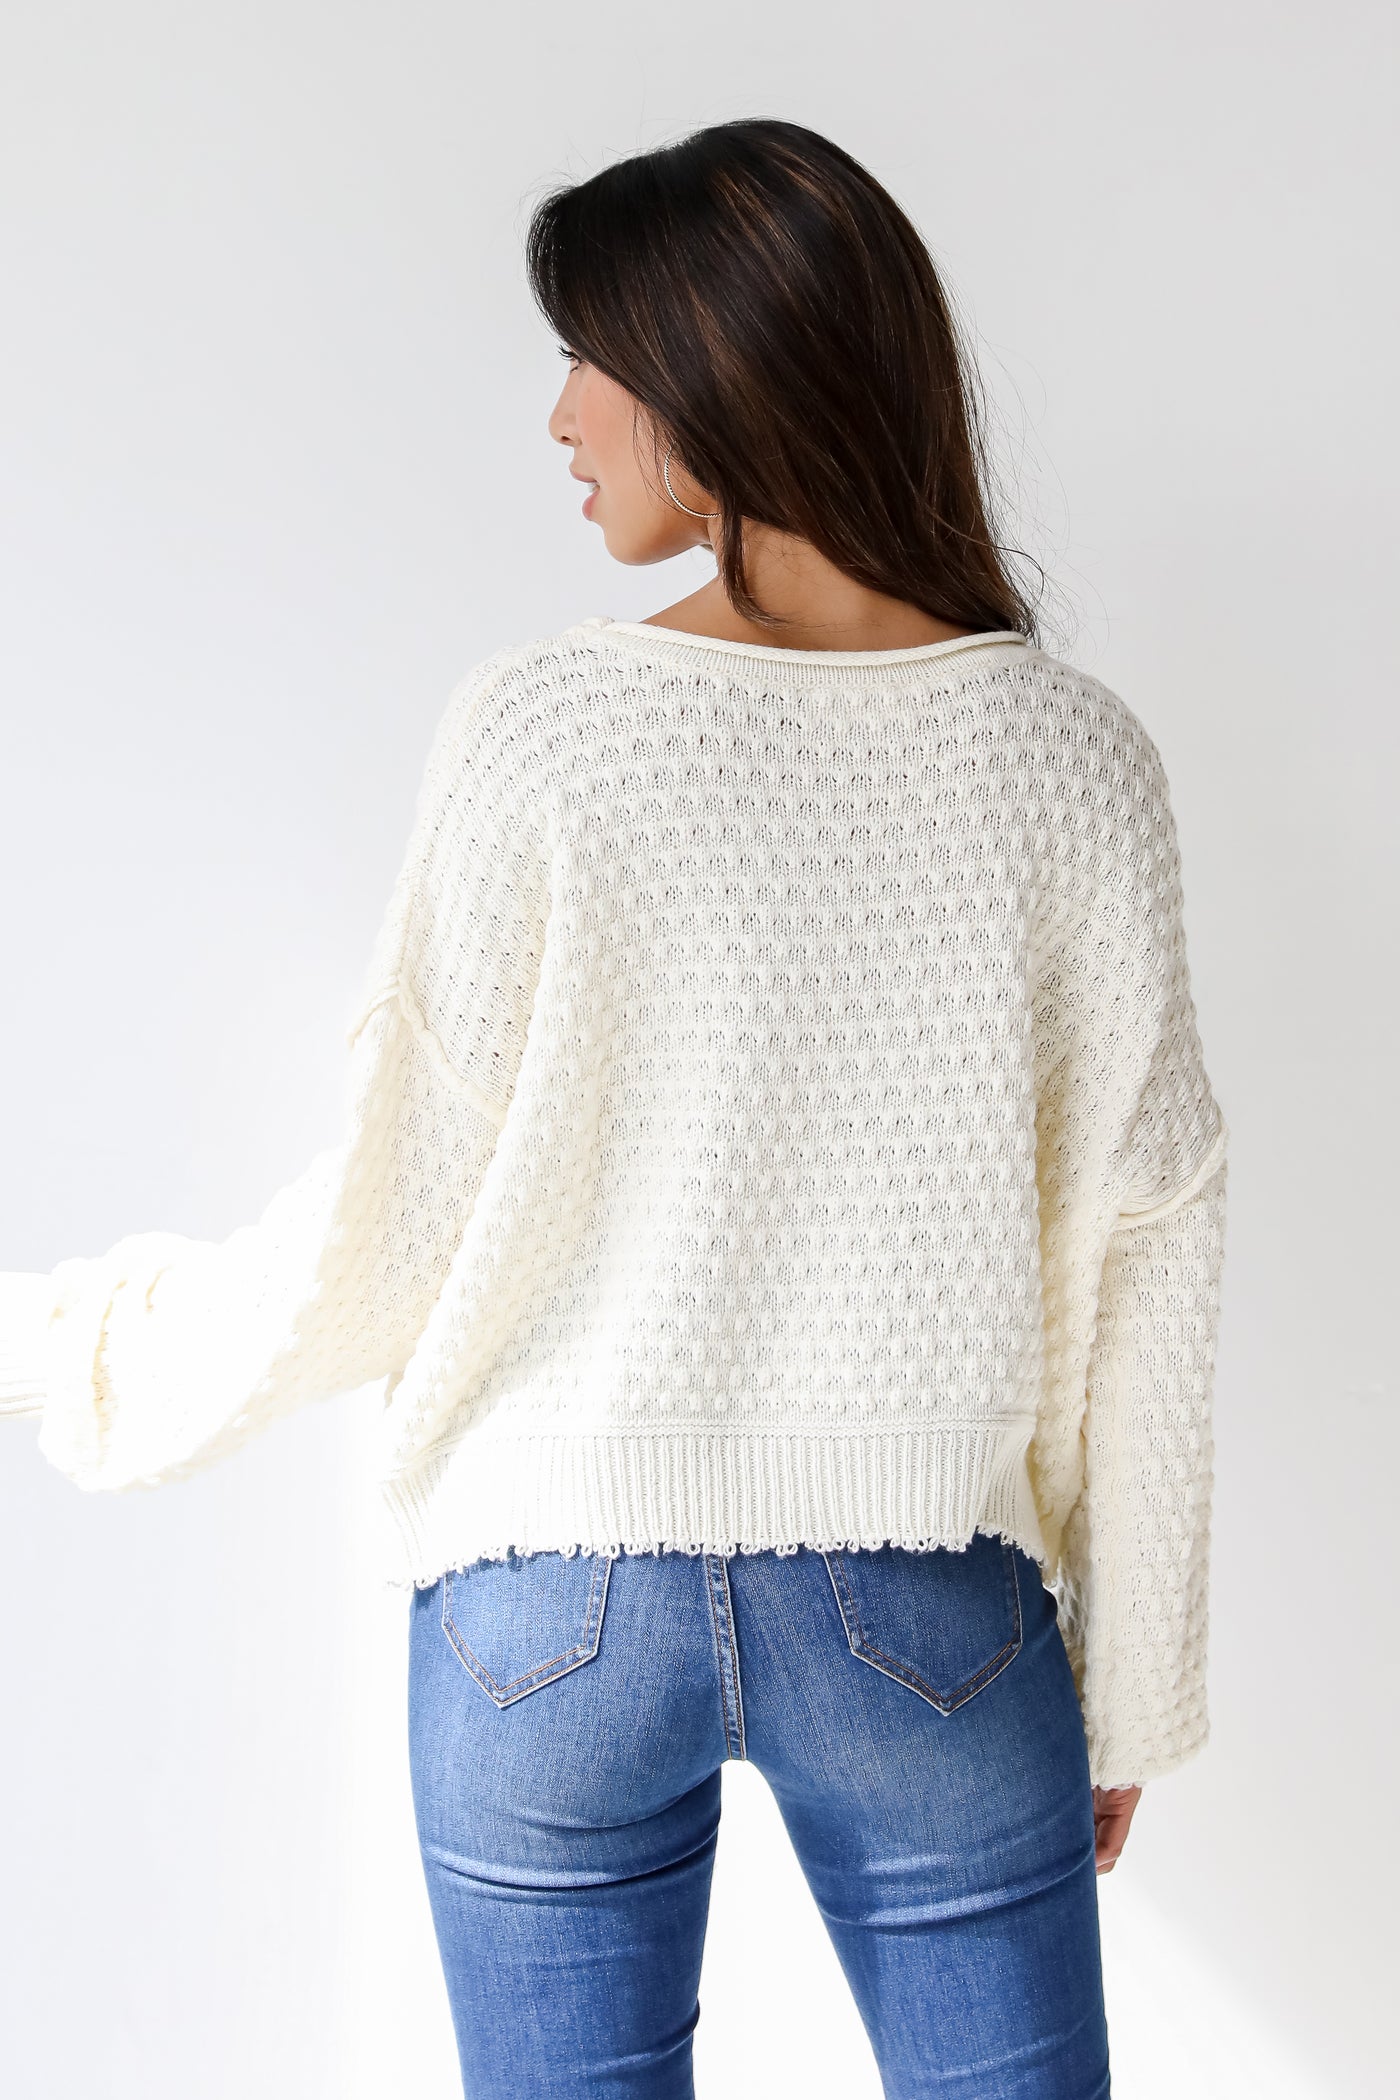 white sweater back view